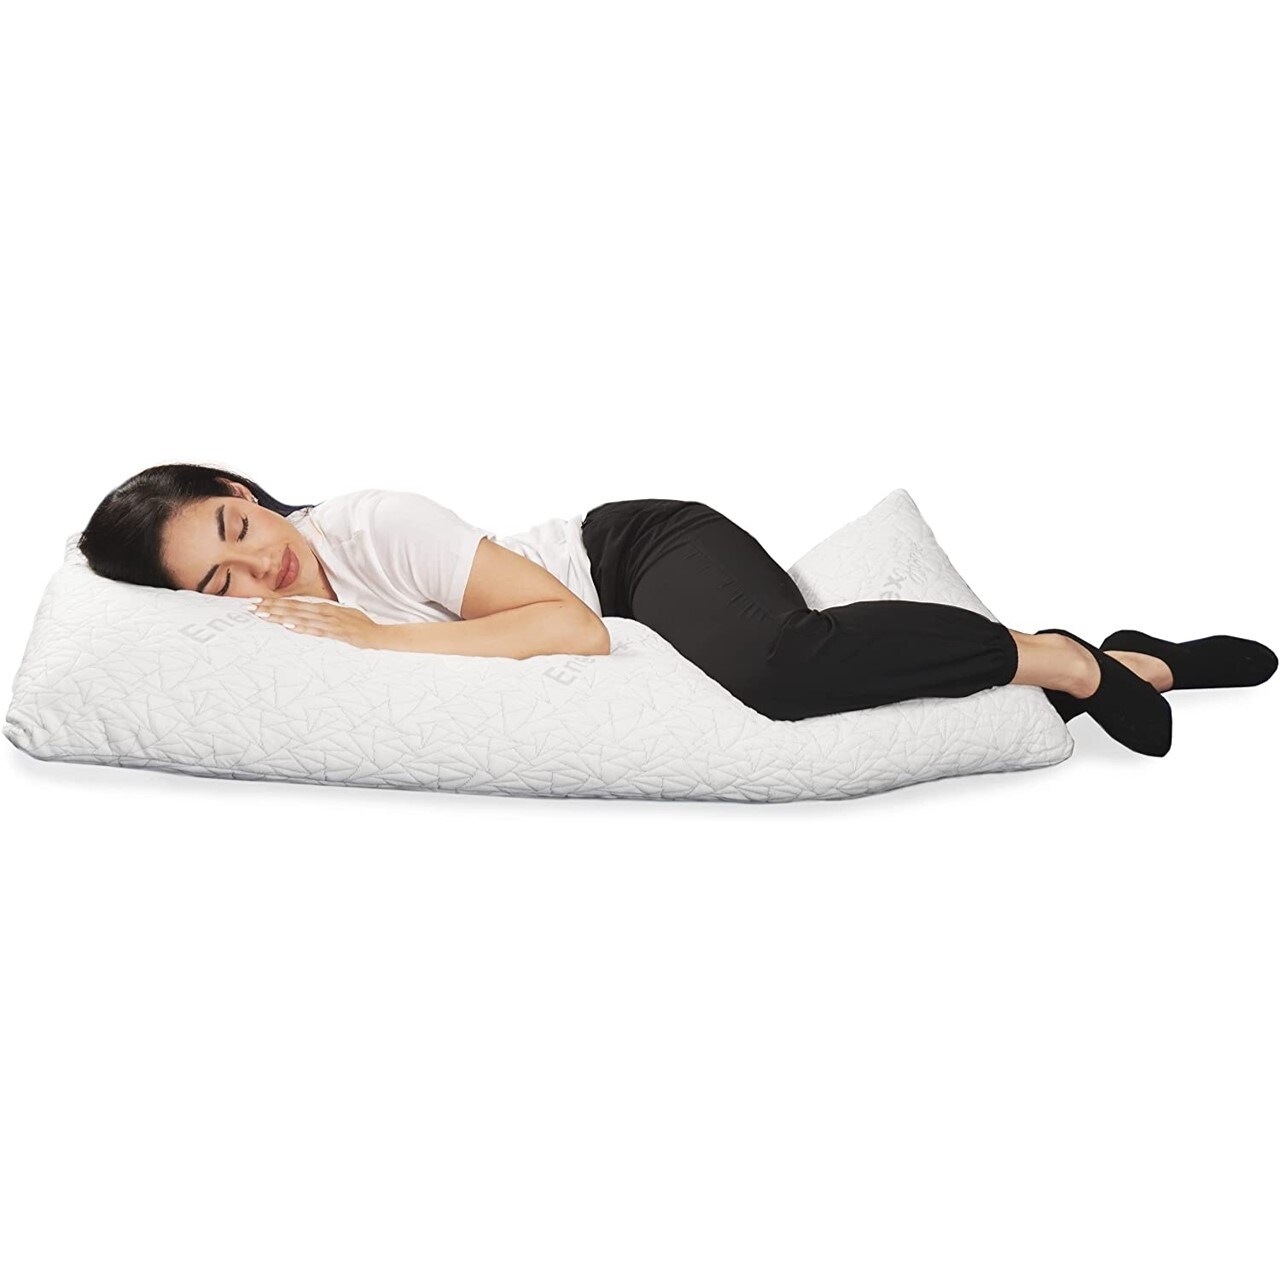 https://ak1.ostkcdn.com/images/products/is/images/direct/d99cfaf0e6a8c181366d533e9f7364eb60a67af6/EnerPlex-Body-Pillow-for-Adults---Pillow-Shredded-Memory-Foam-Pillows.jpg